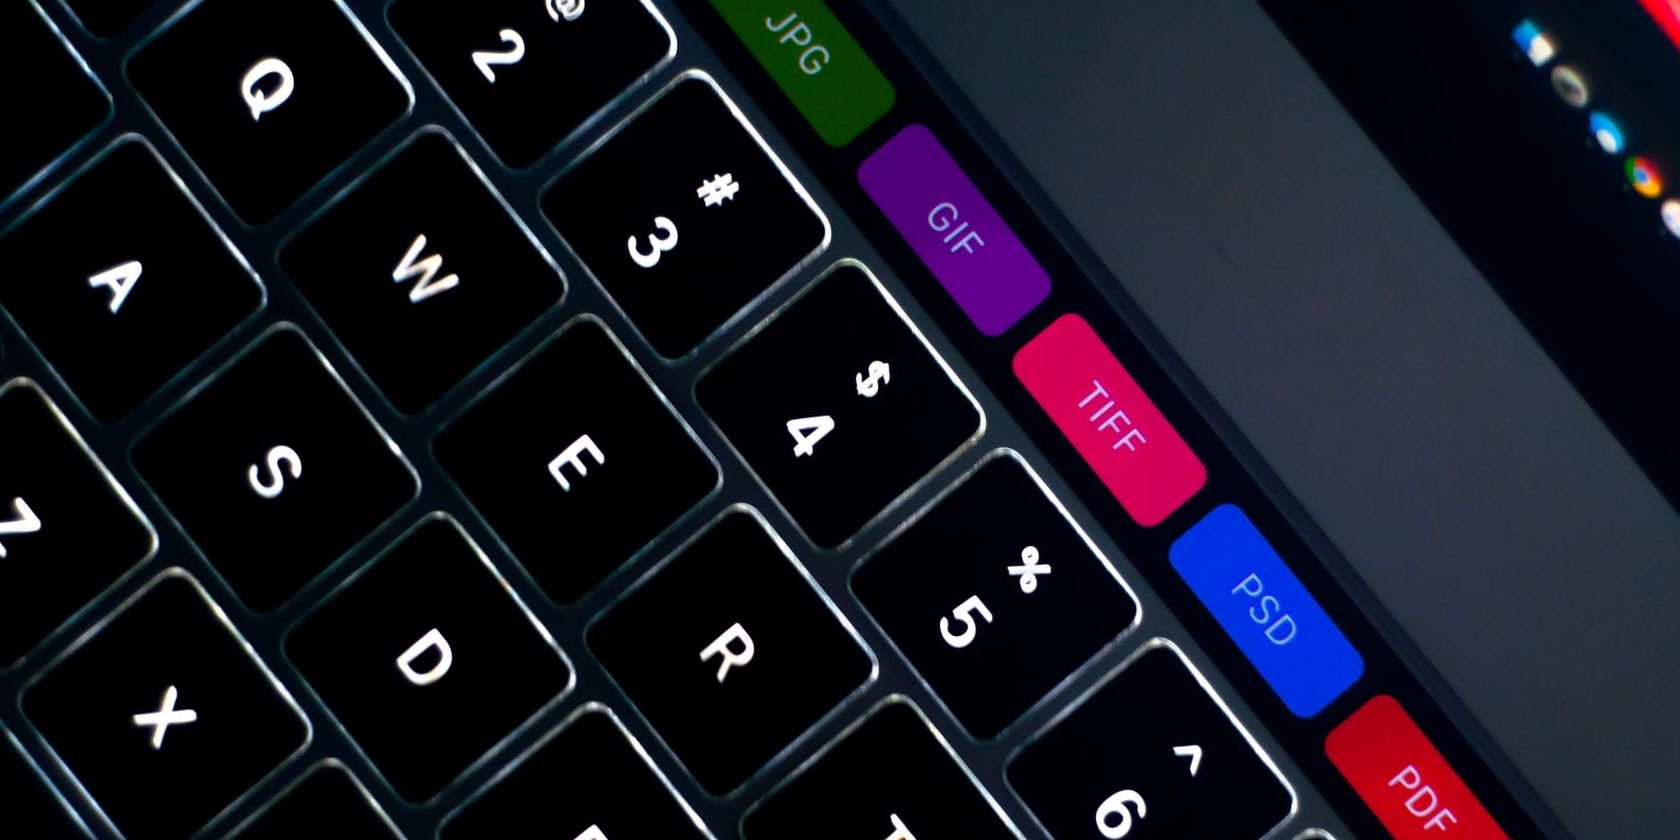 Macbook Touch Bar with various file format options displayed, including JPG, GIF, and PDF.